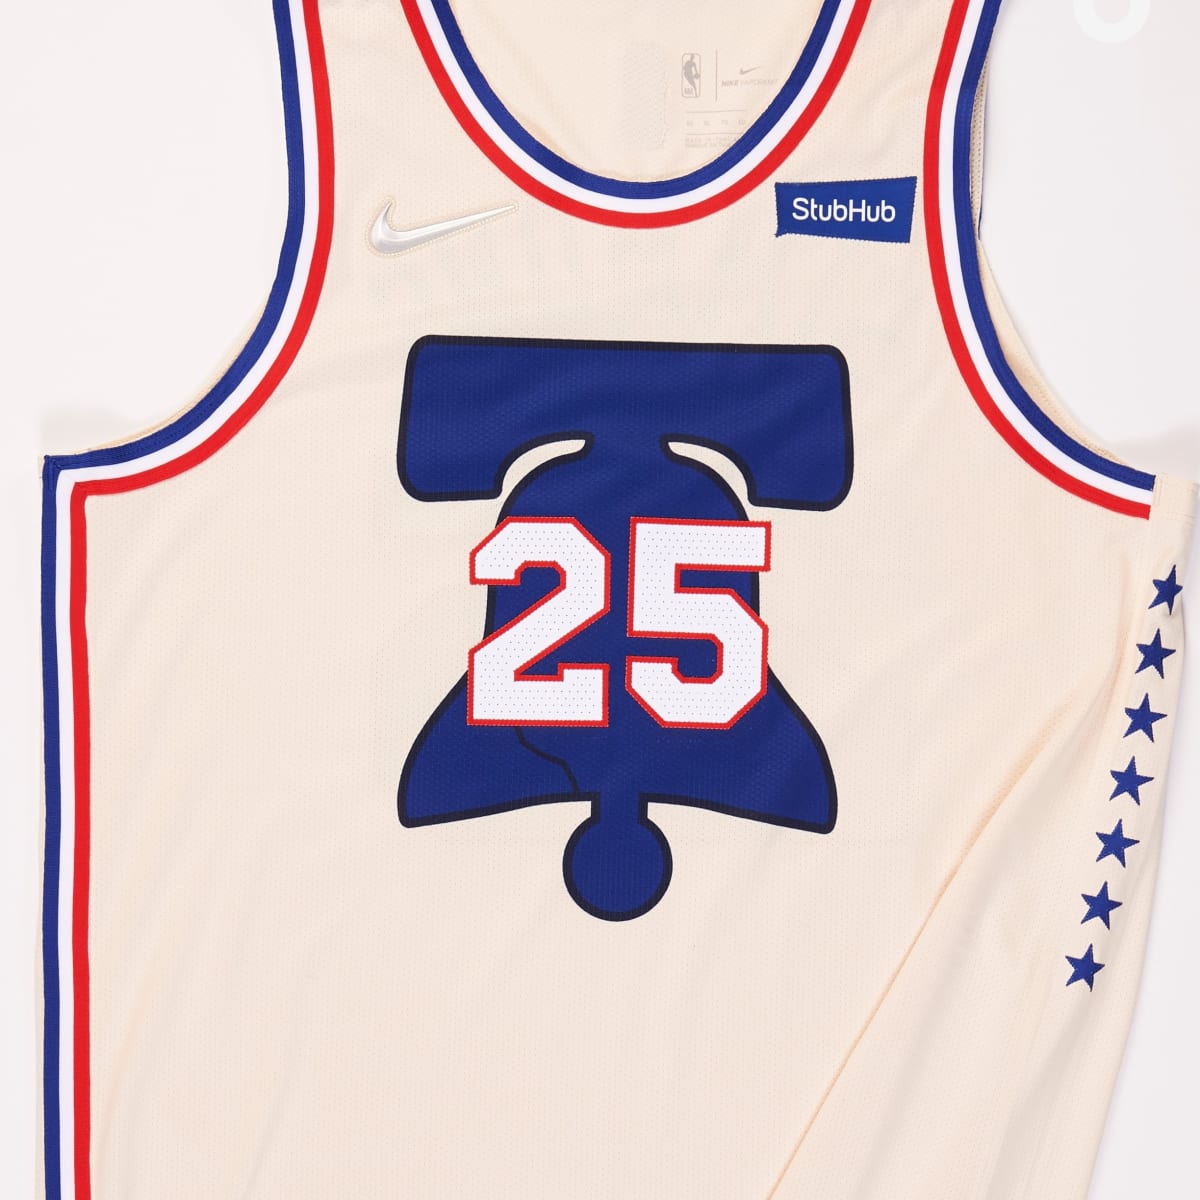 Sixers' Earned Jerseys Officially 